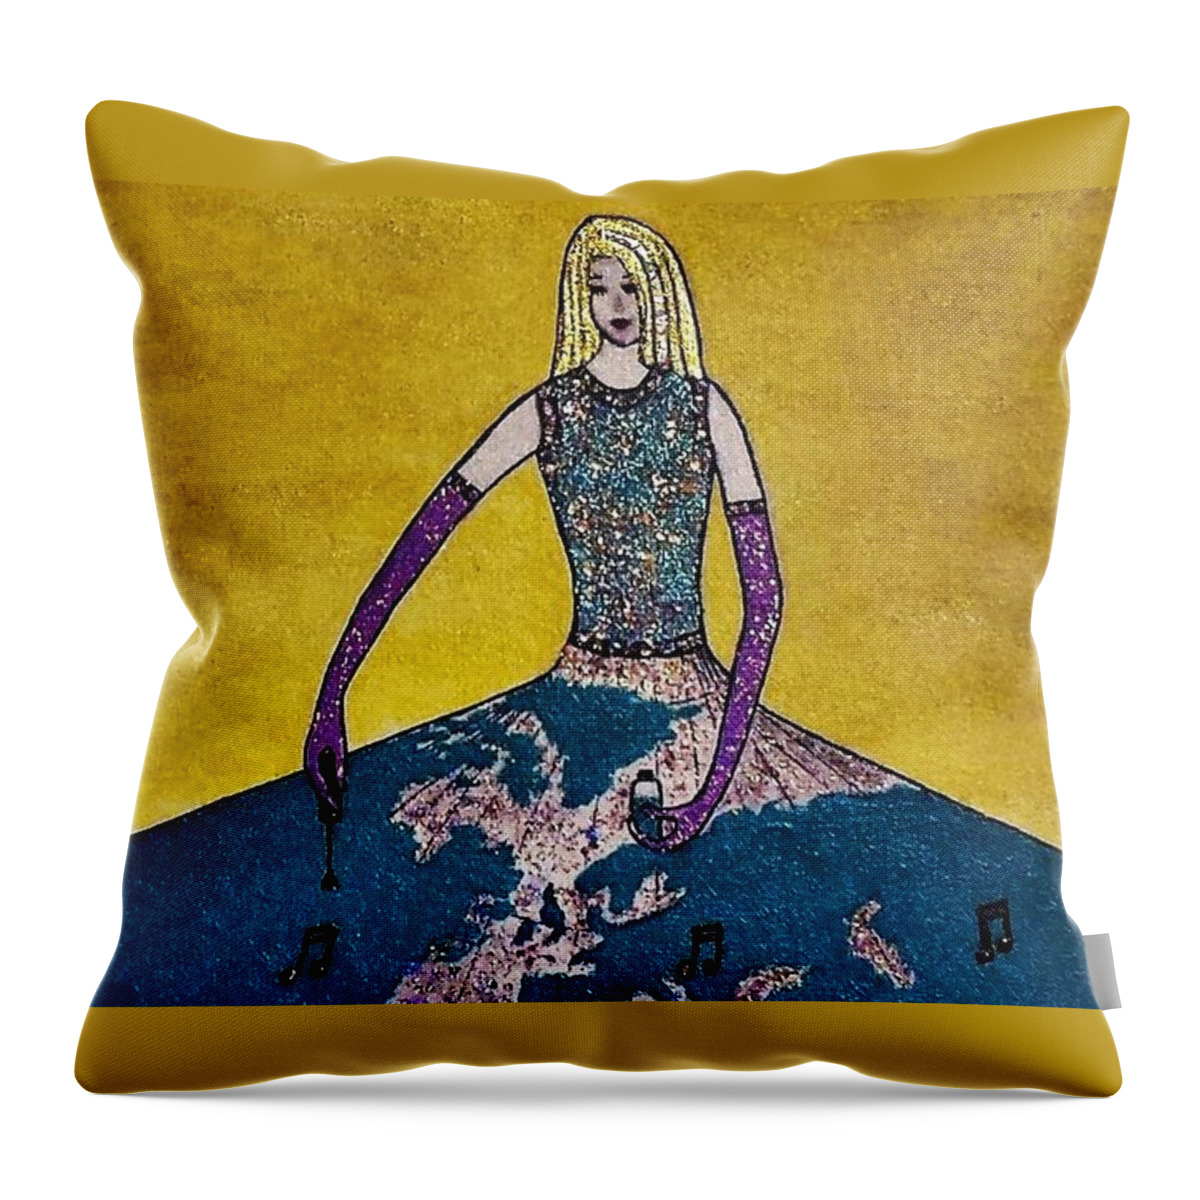  Music Throw Pillow featuring the painting Music world by Jasna Gopic by Jasna Gopic